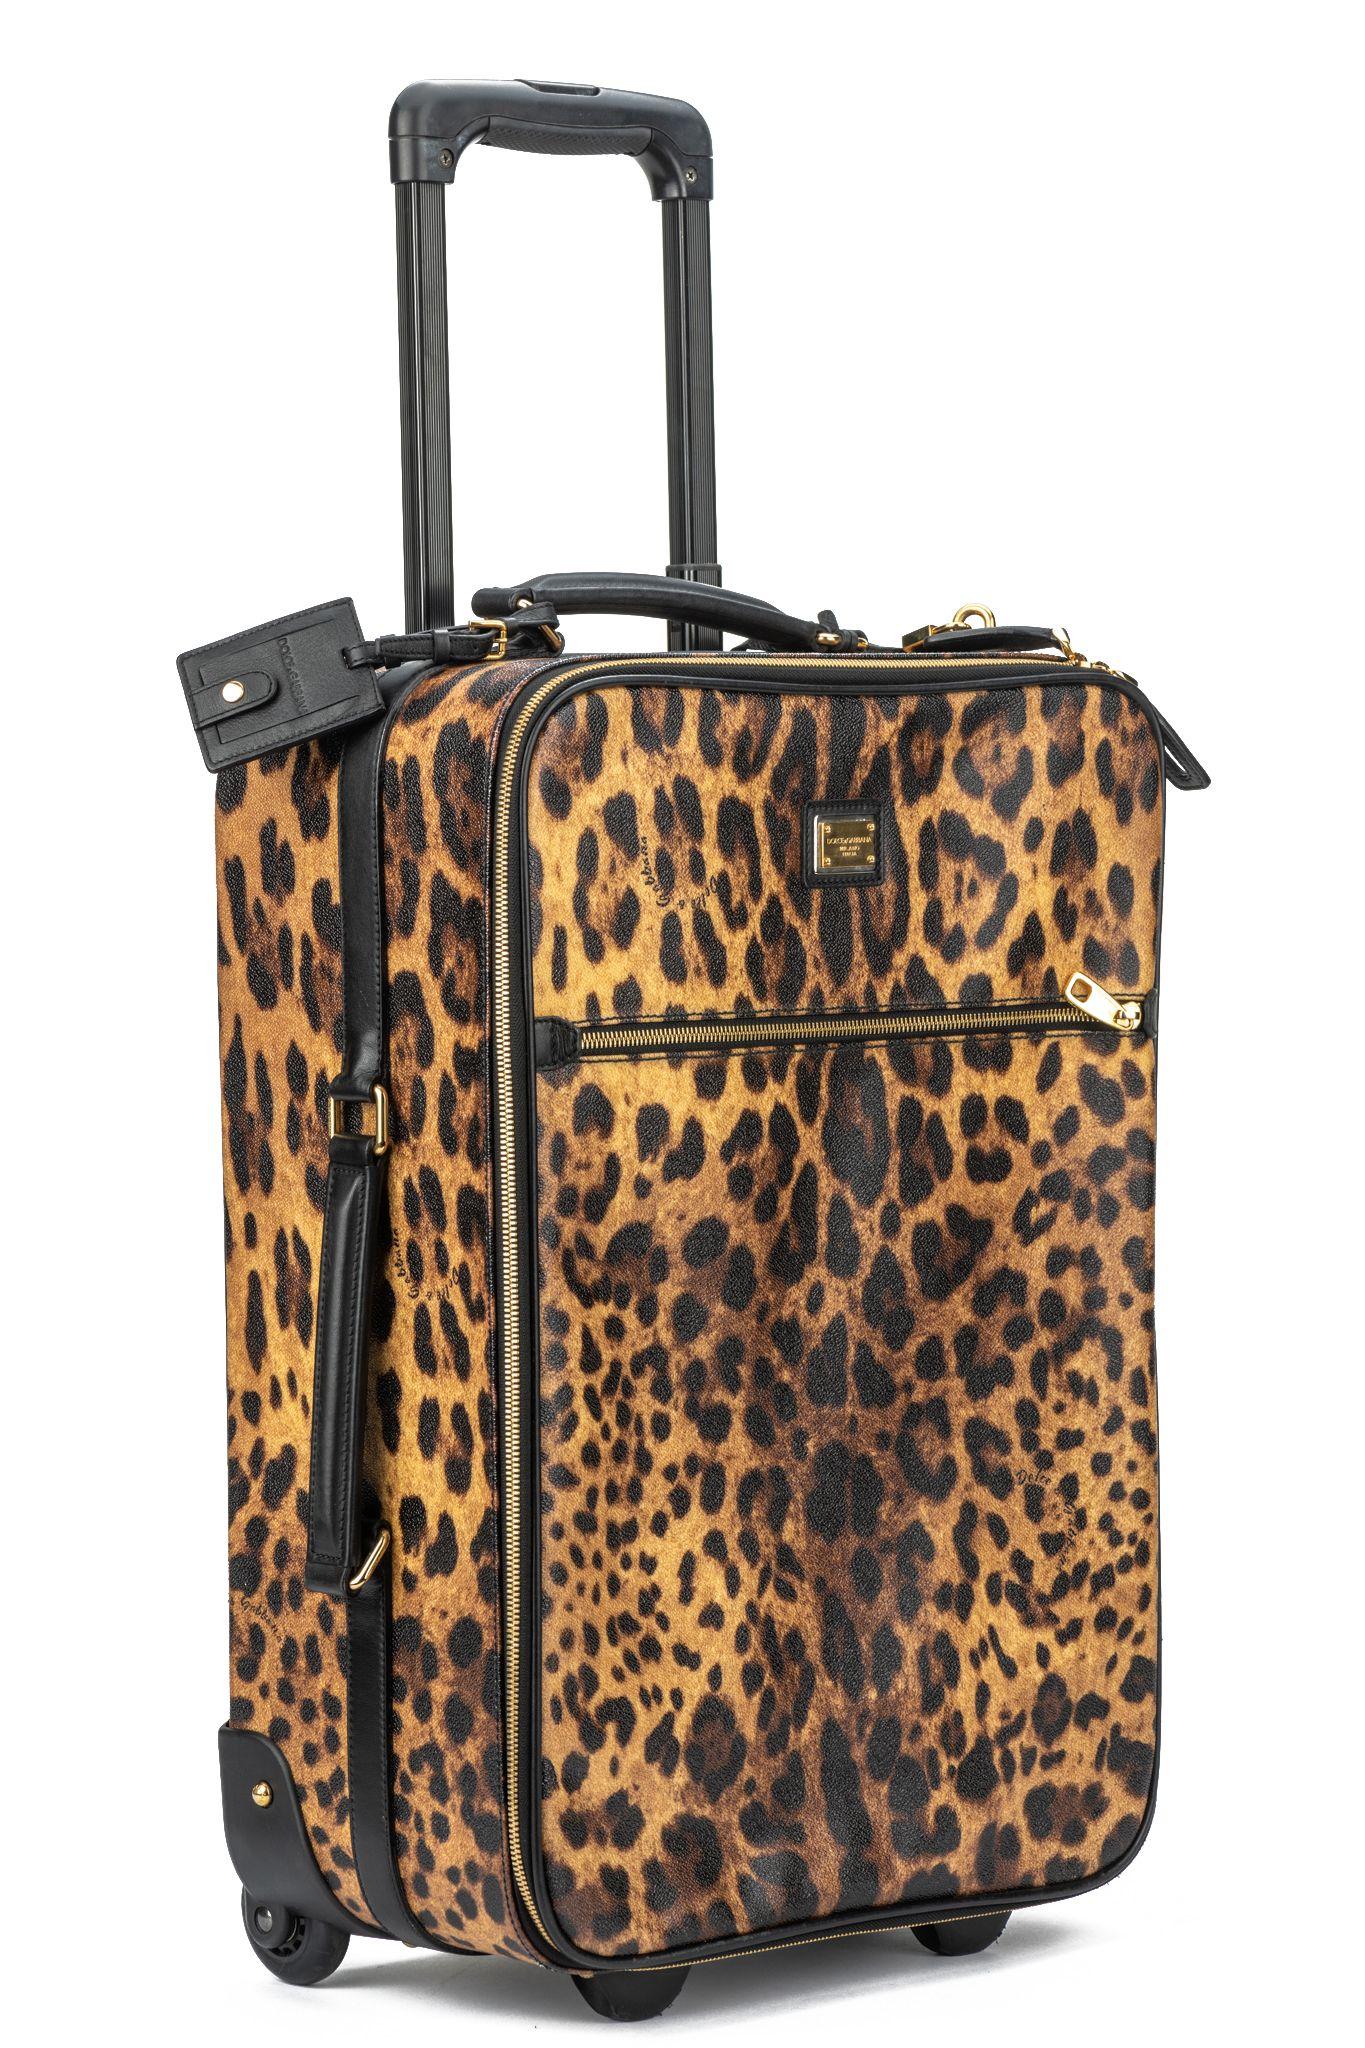 Dolce Cheetah Print Carry On Luggage For Sale 12